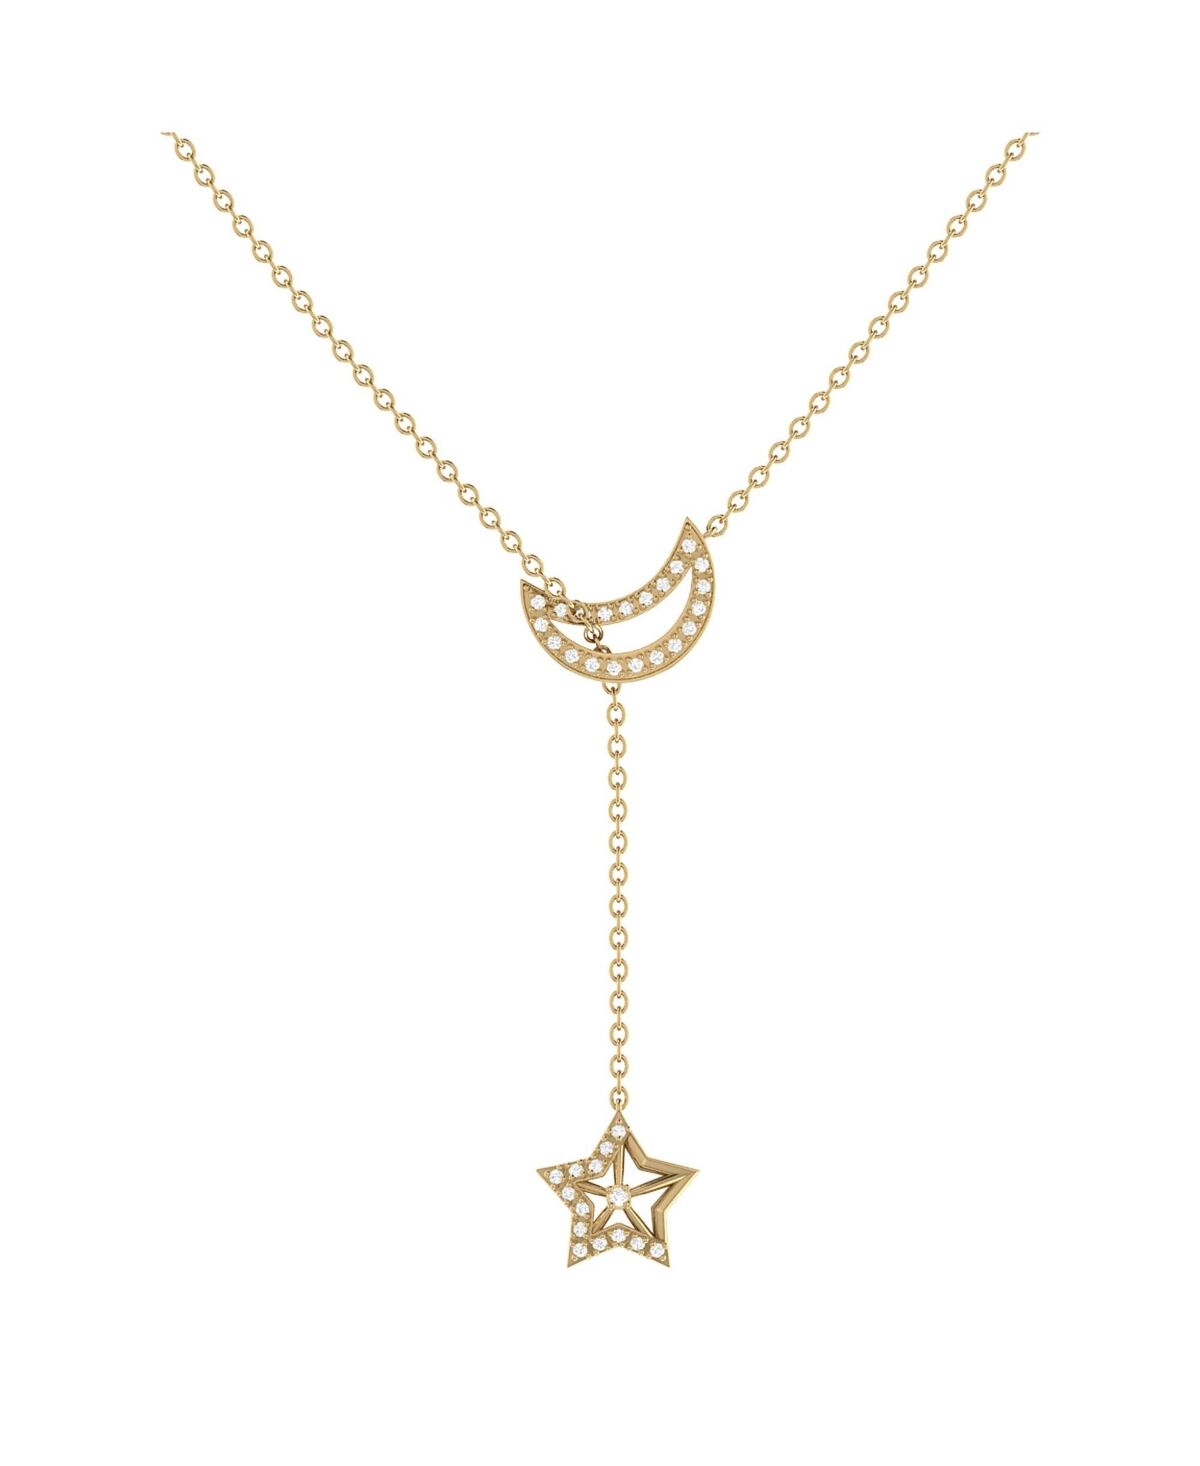 LuvMyJewelry Shooting Star Moon Crescent Design Sterling Silver Diamond Women Necklace - Yellow